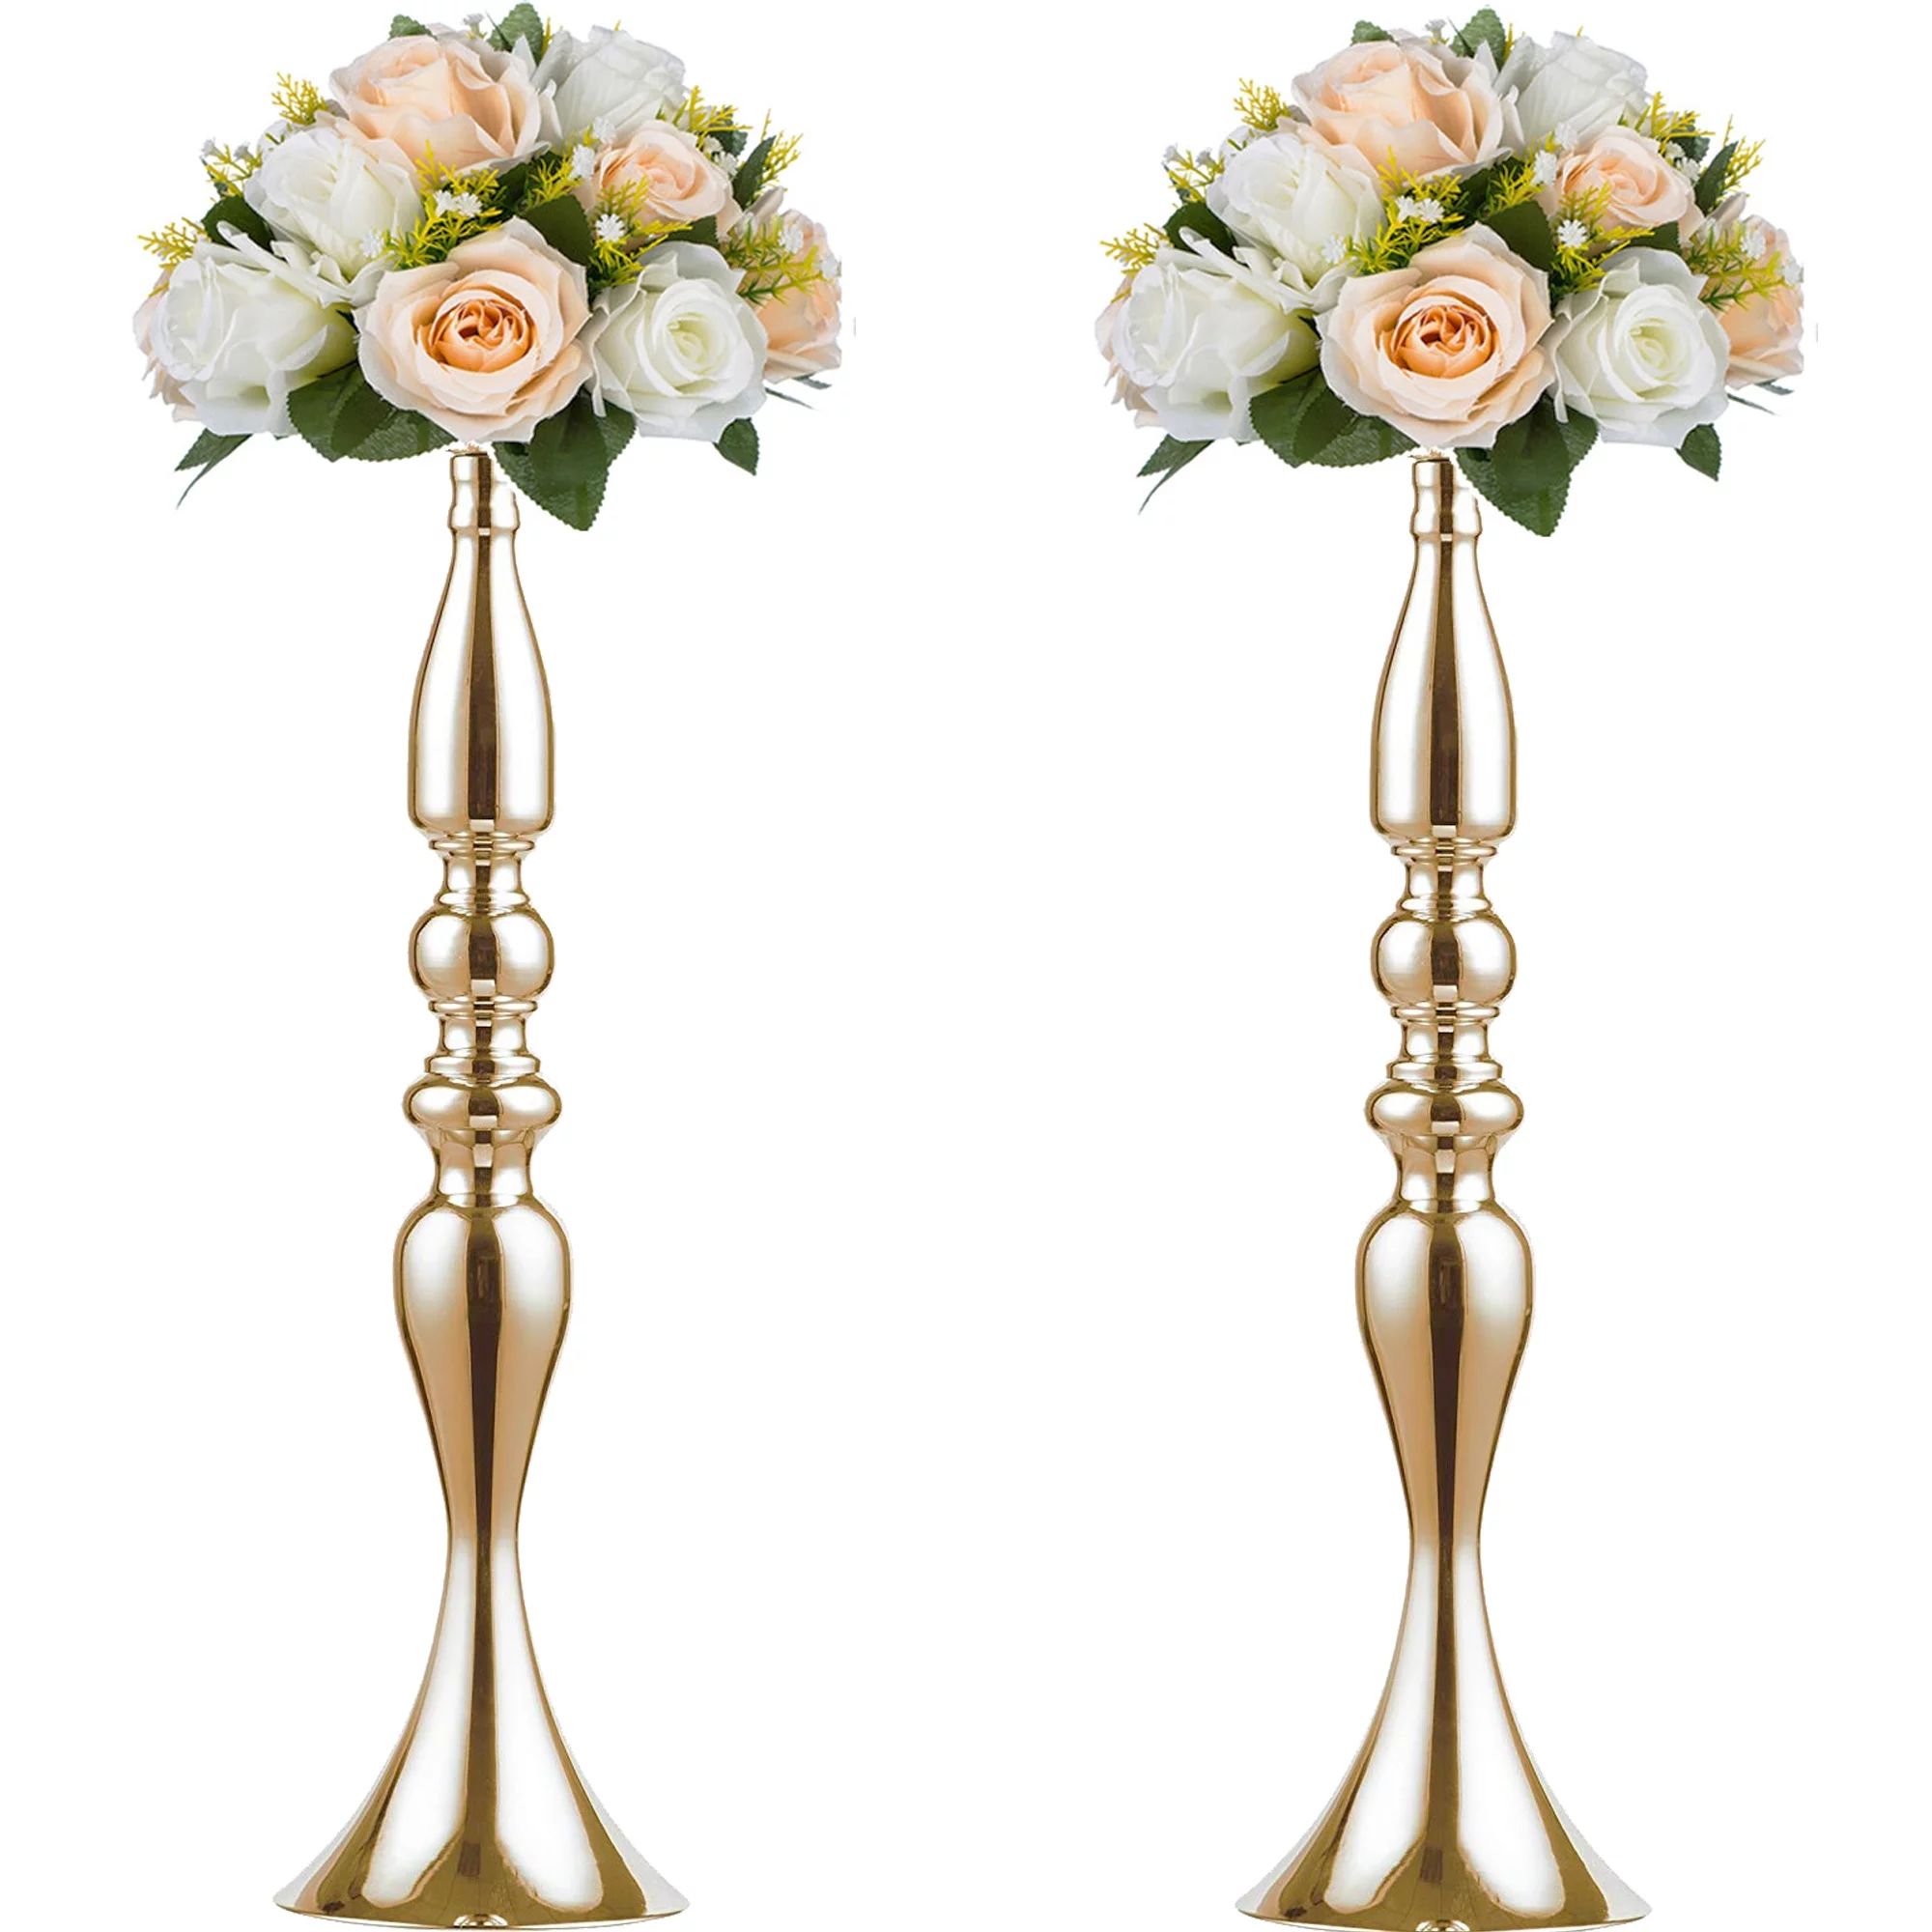 Nuptio 20" Gold Centerpieces for Table Decoration Vases for Wedding Set of 2 | Walmart (US)